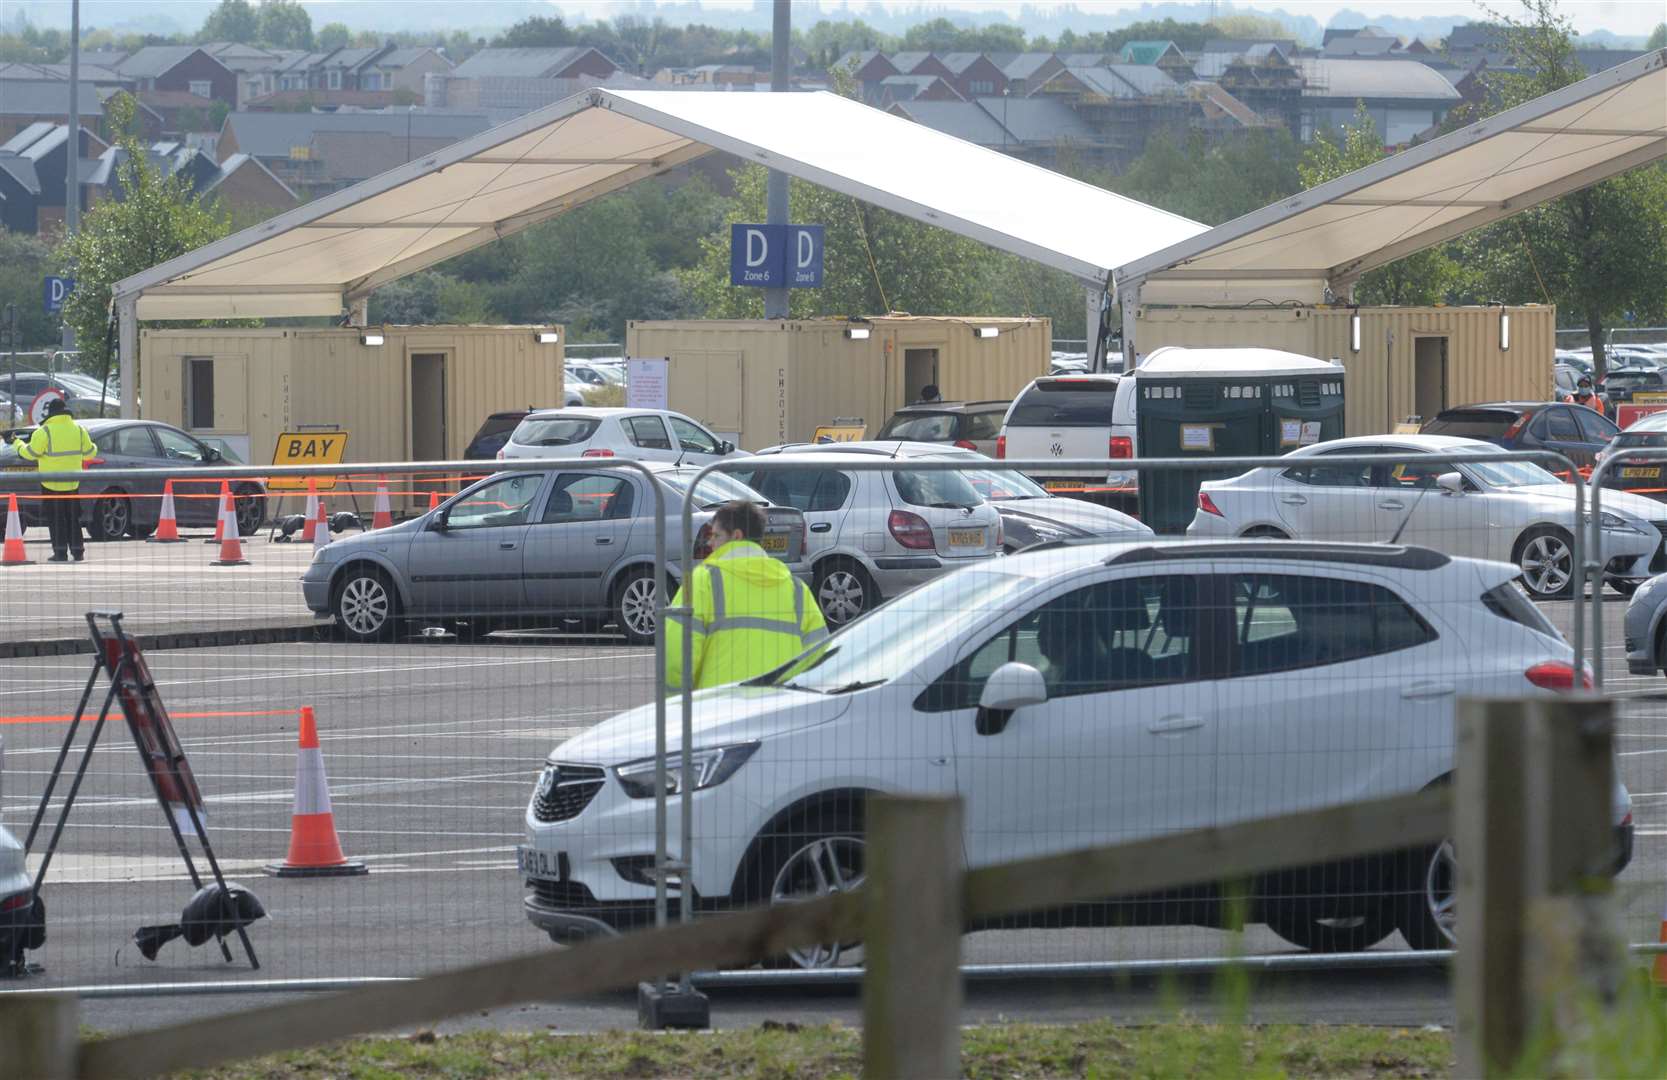 Ebbsfleet International car park D has been earmarked for the government's Brexit plans. Picture: Chris Davey